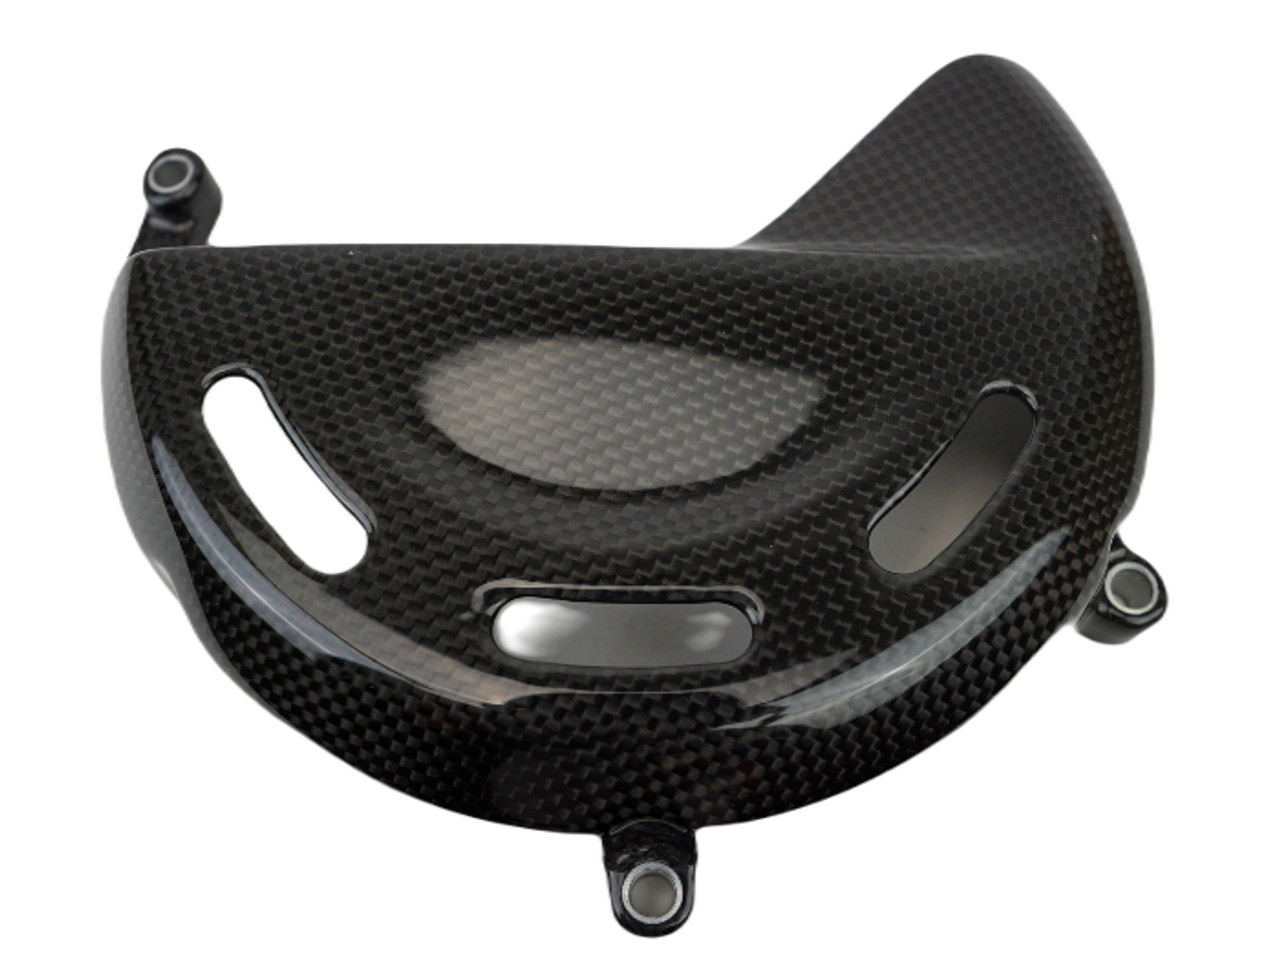 Dry Clutch Cover Guard (Smaller) in Glossy Plain Weave Carbon Fiber for Ducati Streetfighter V4, Panigale V4

